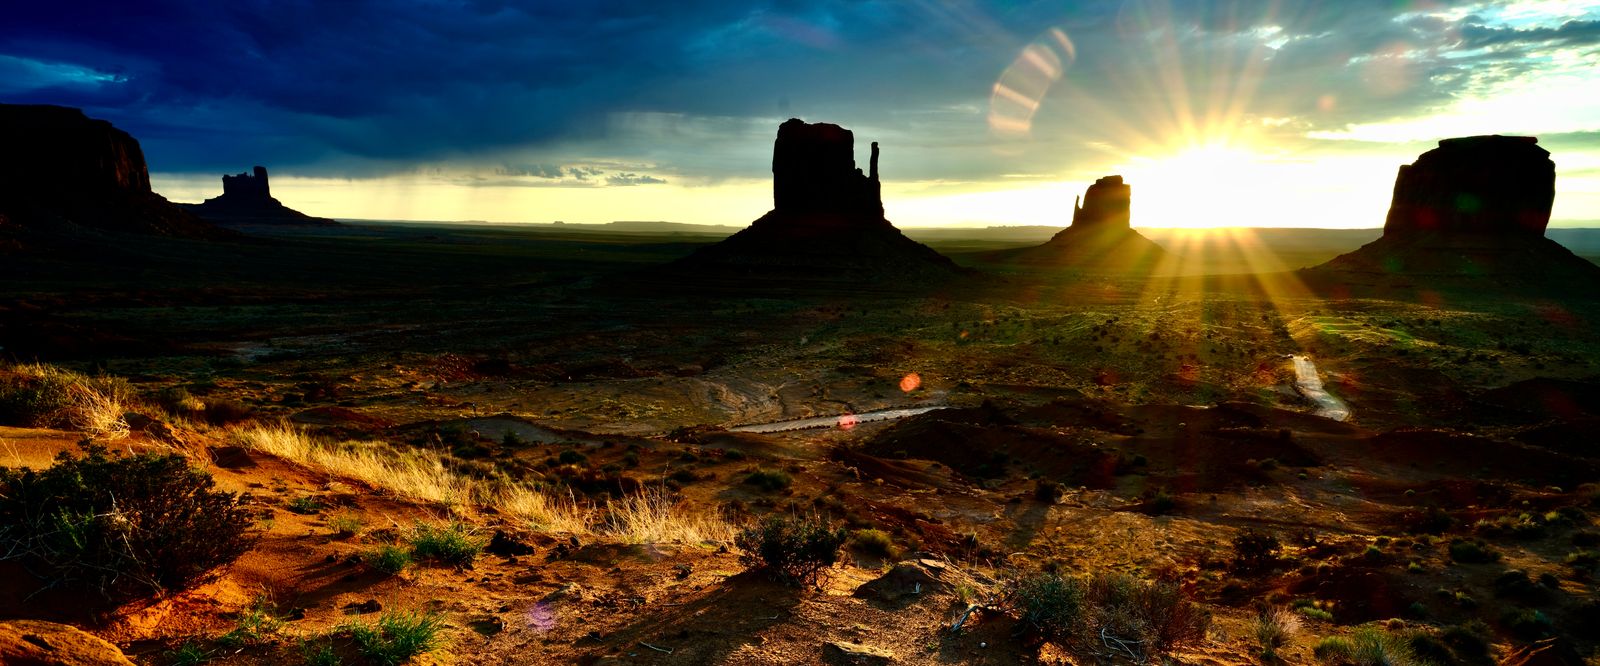 Rising Sun in Monument Valley Navajo Country